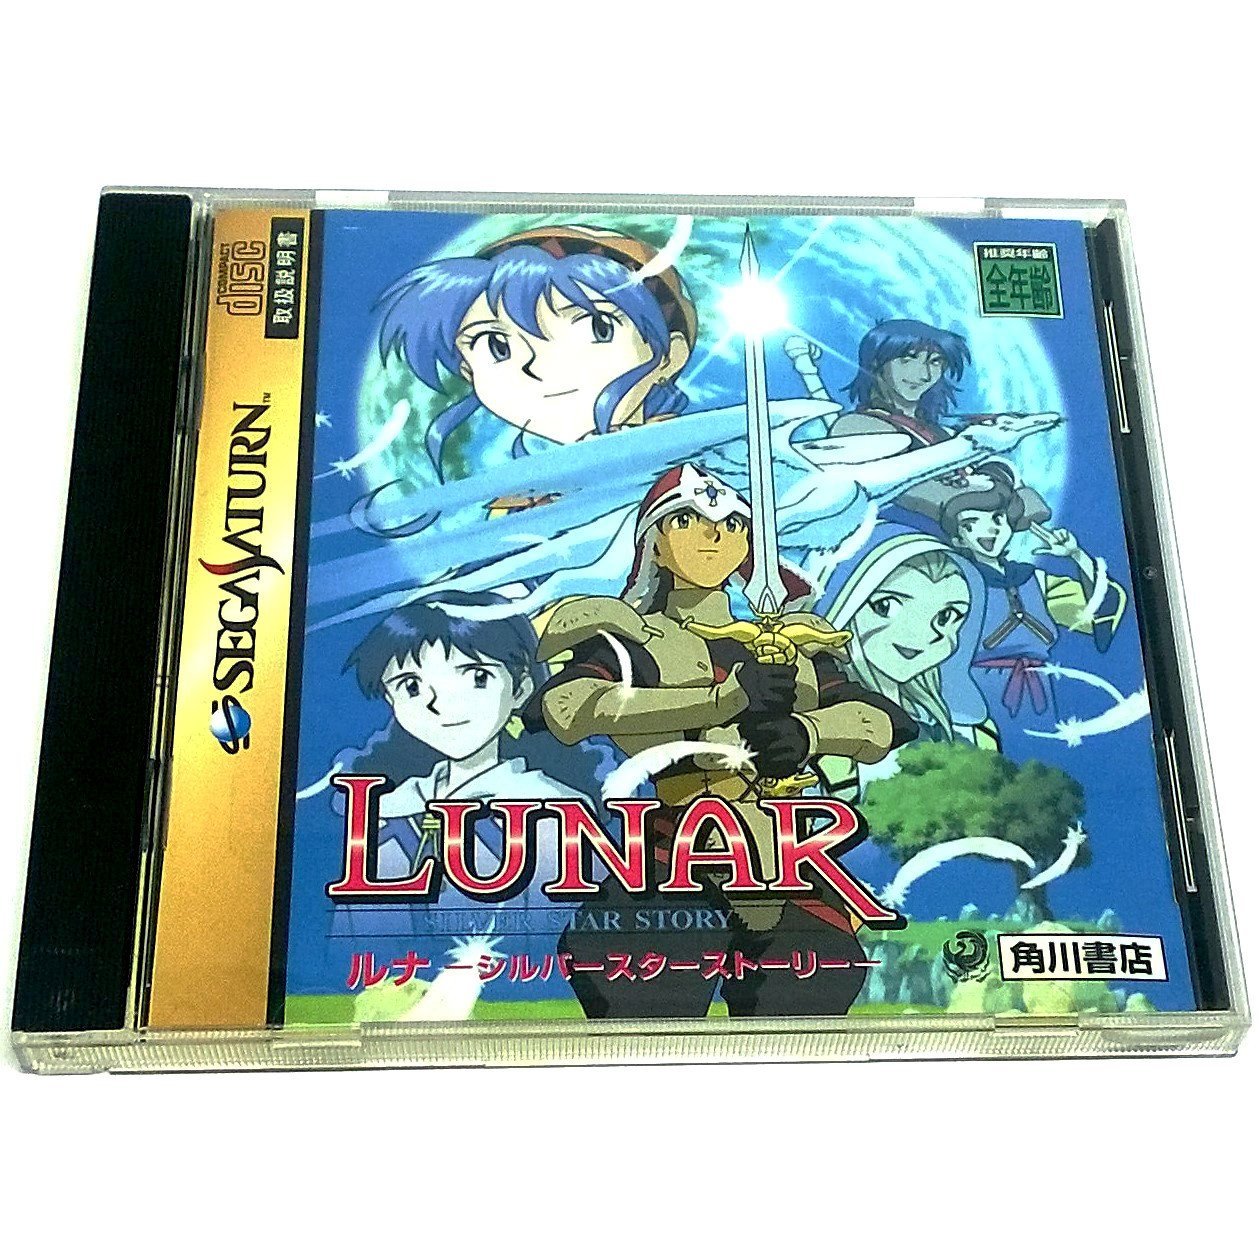 Lunar: Silver Star Story for Saturn (Import) - Front of case